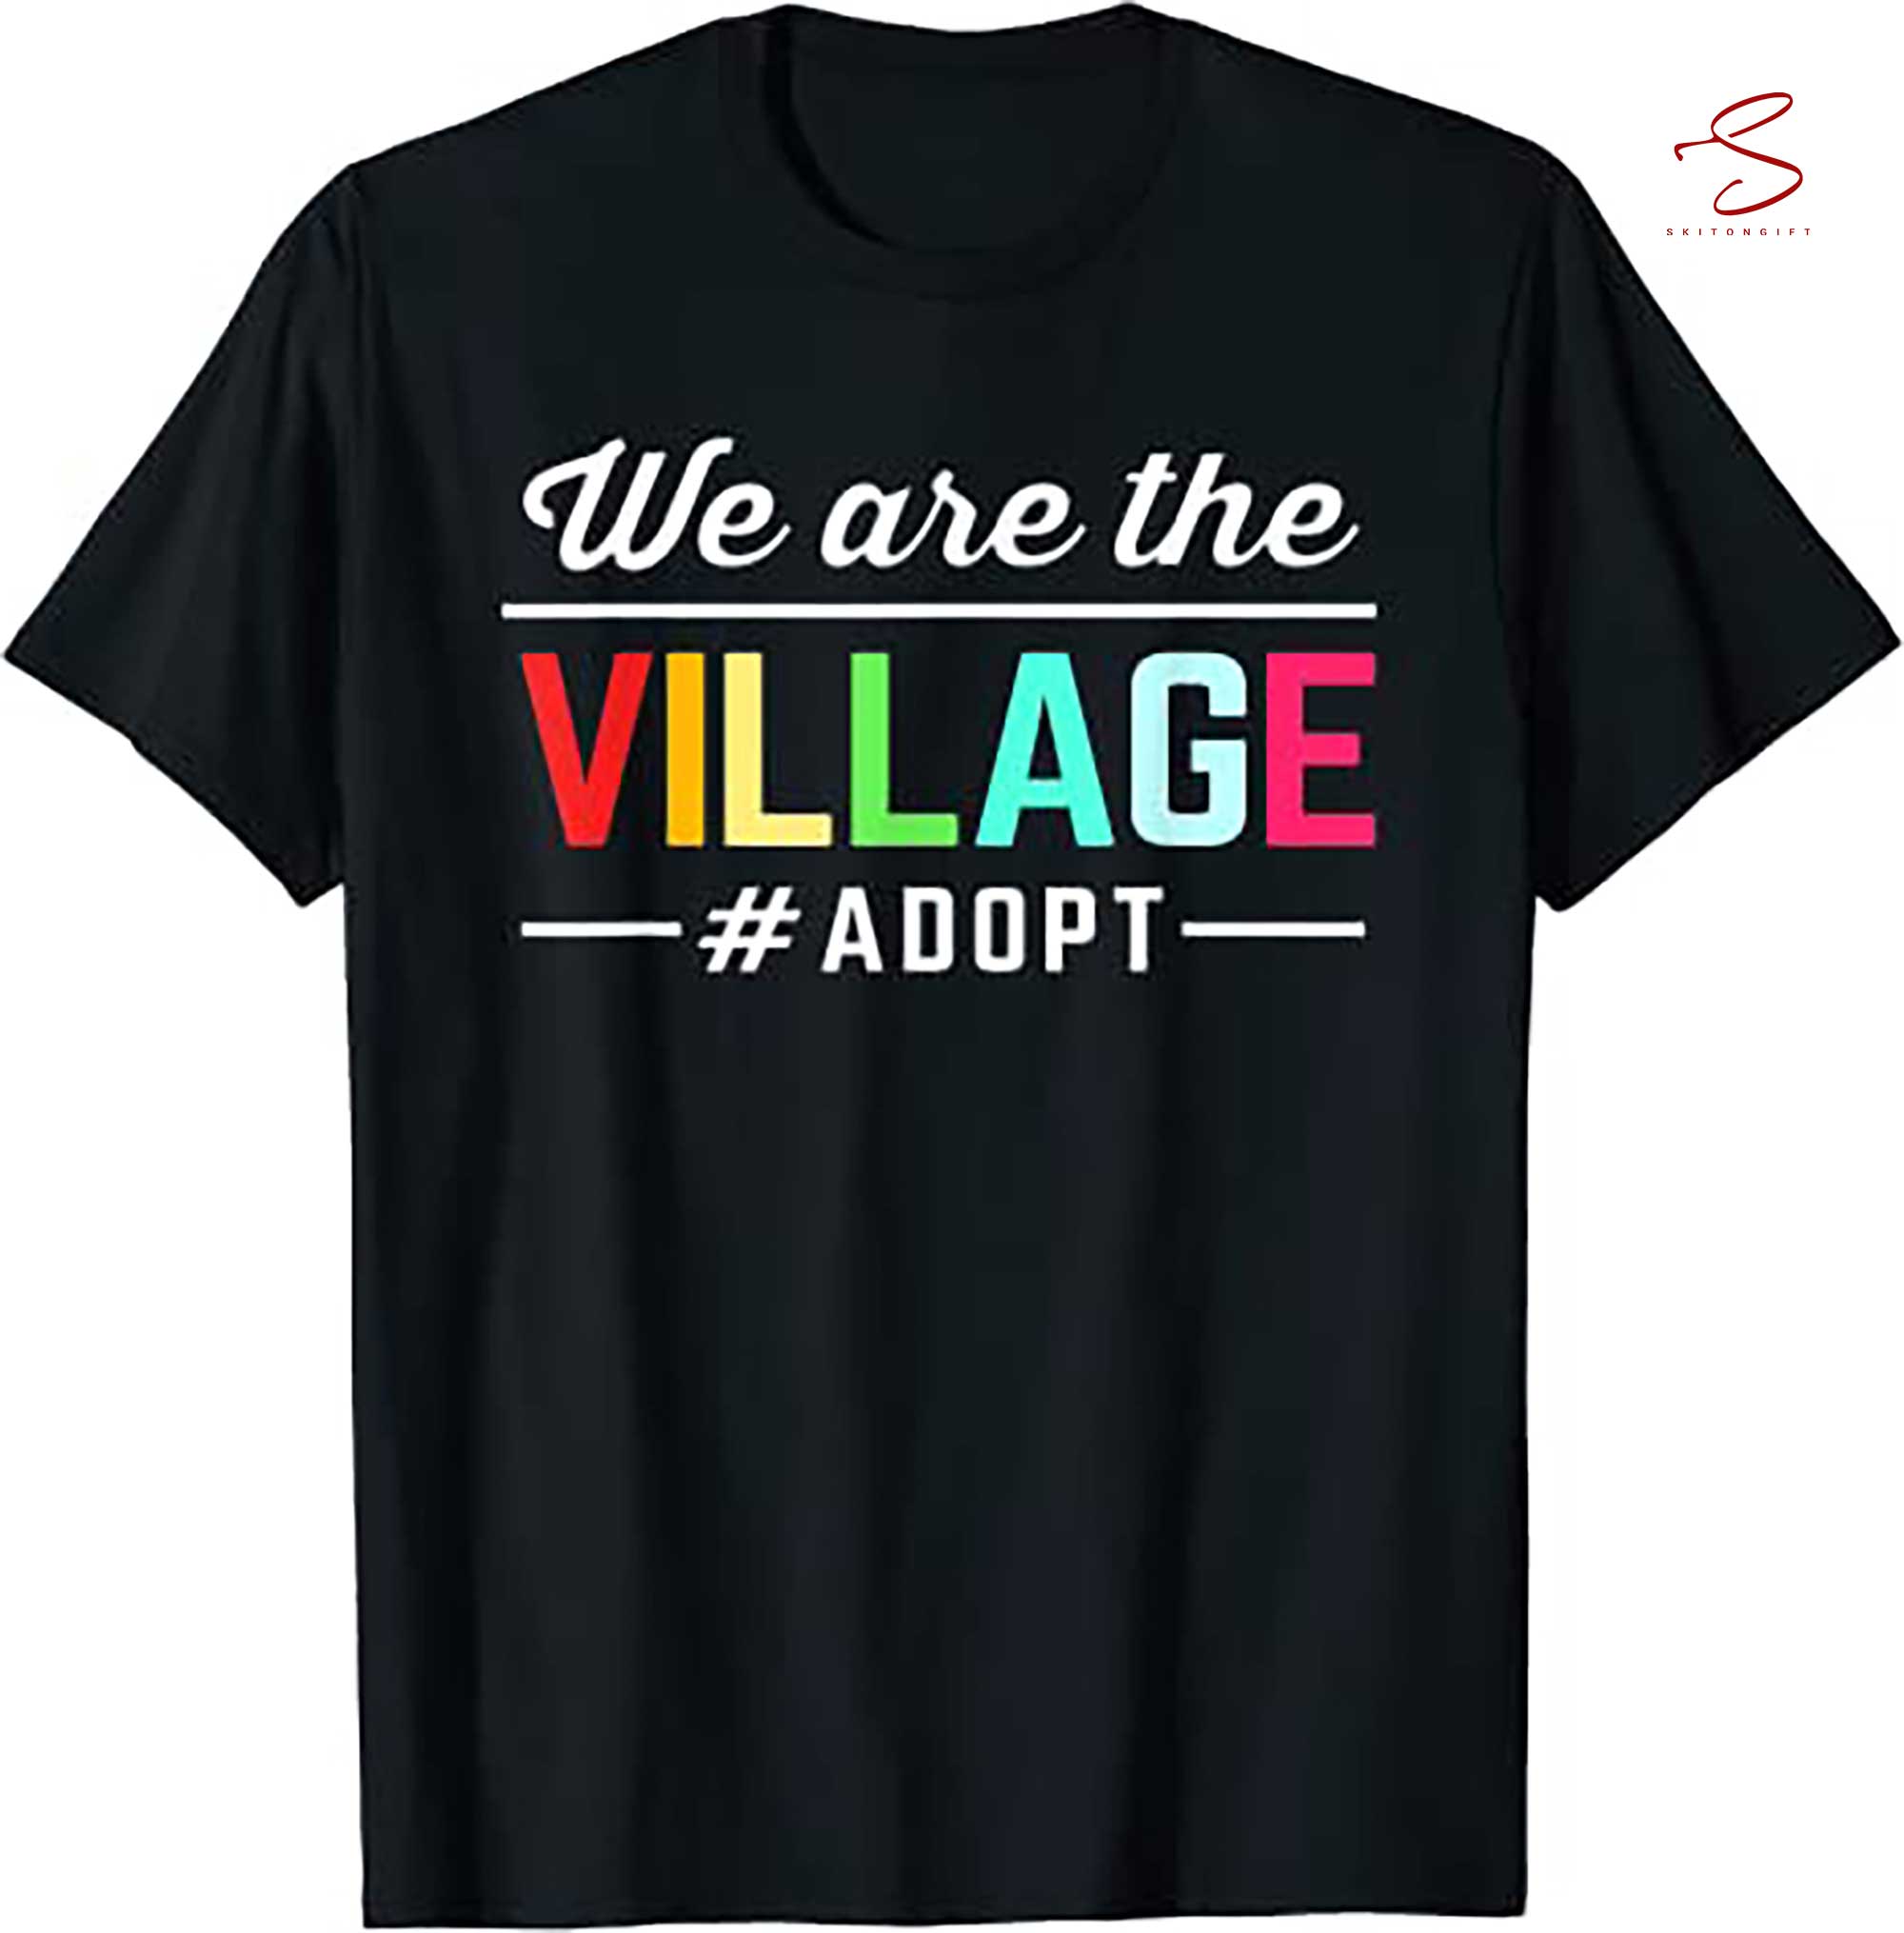 Skitongift Adoption Family We Are The Village T Shirt Funny Shirts Long Sleeve Tee Hoody Hoodie Heavyweight Pullover Hoodies Sweater